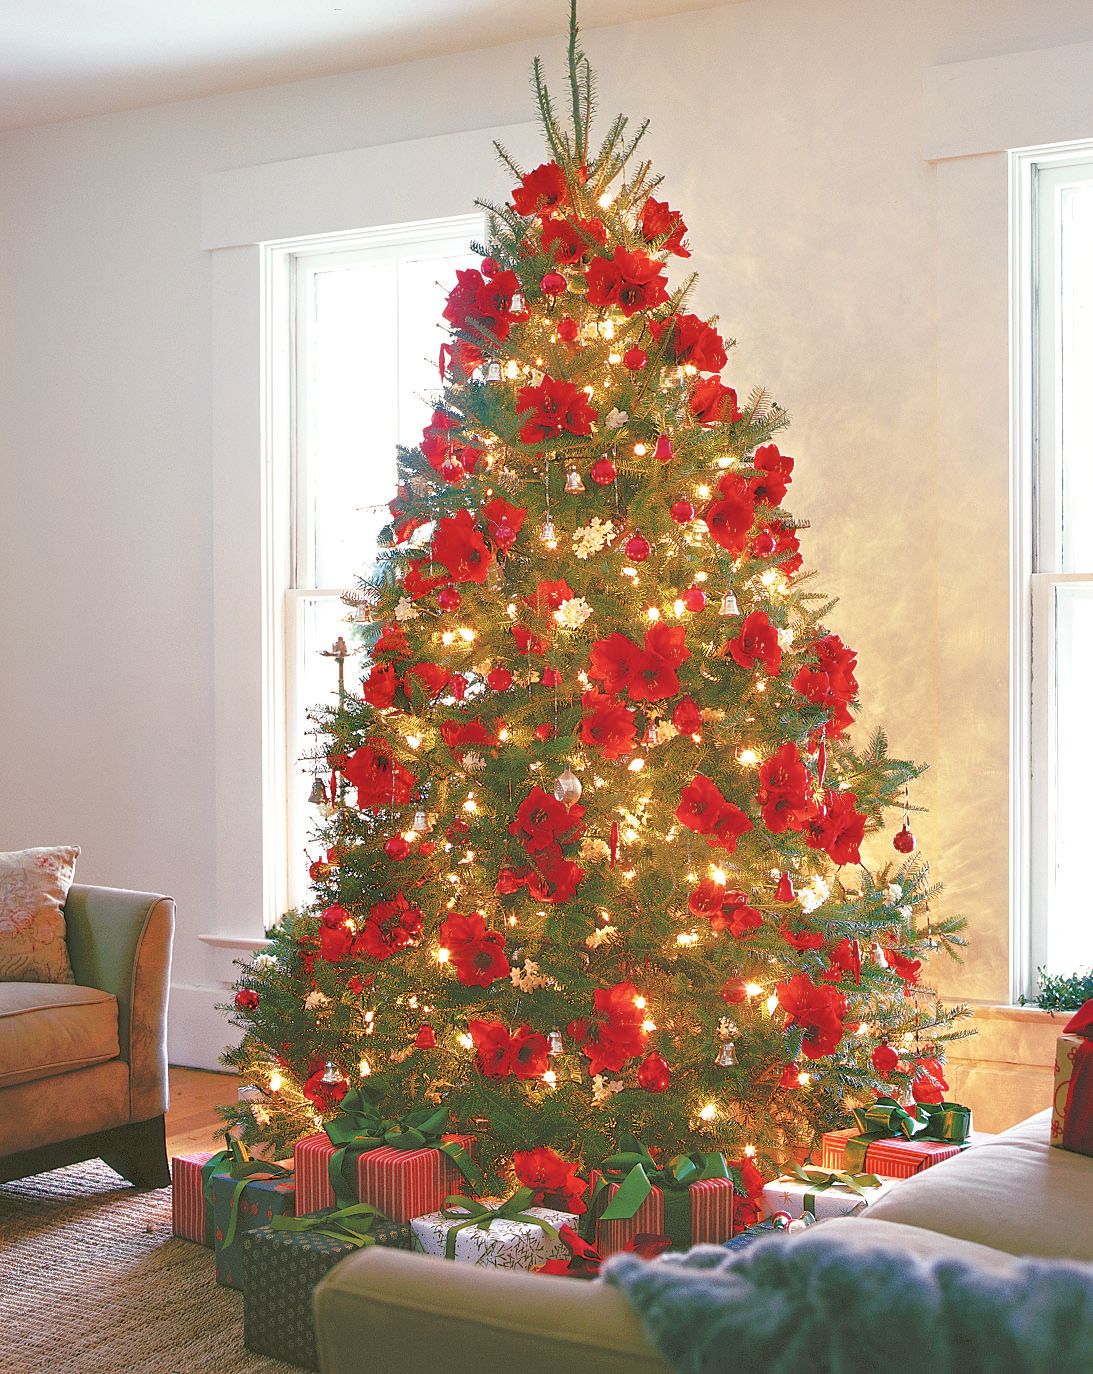 70 Decorated Christmas Tree Ideas - Pictures of Christmas Tree Inspiration